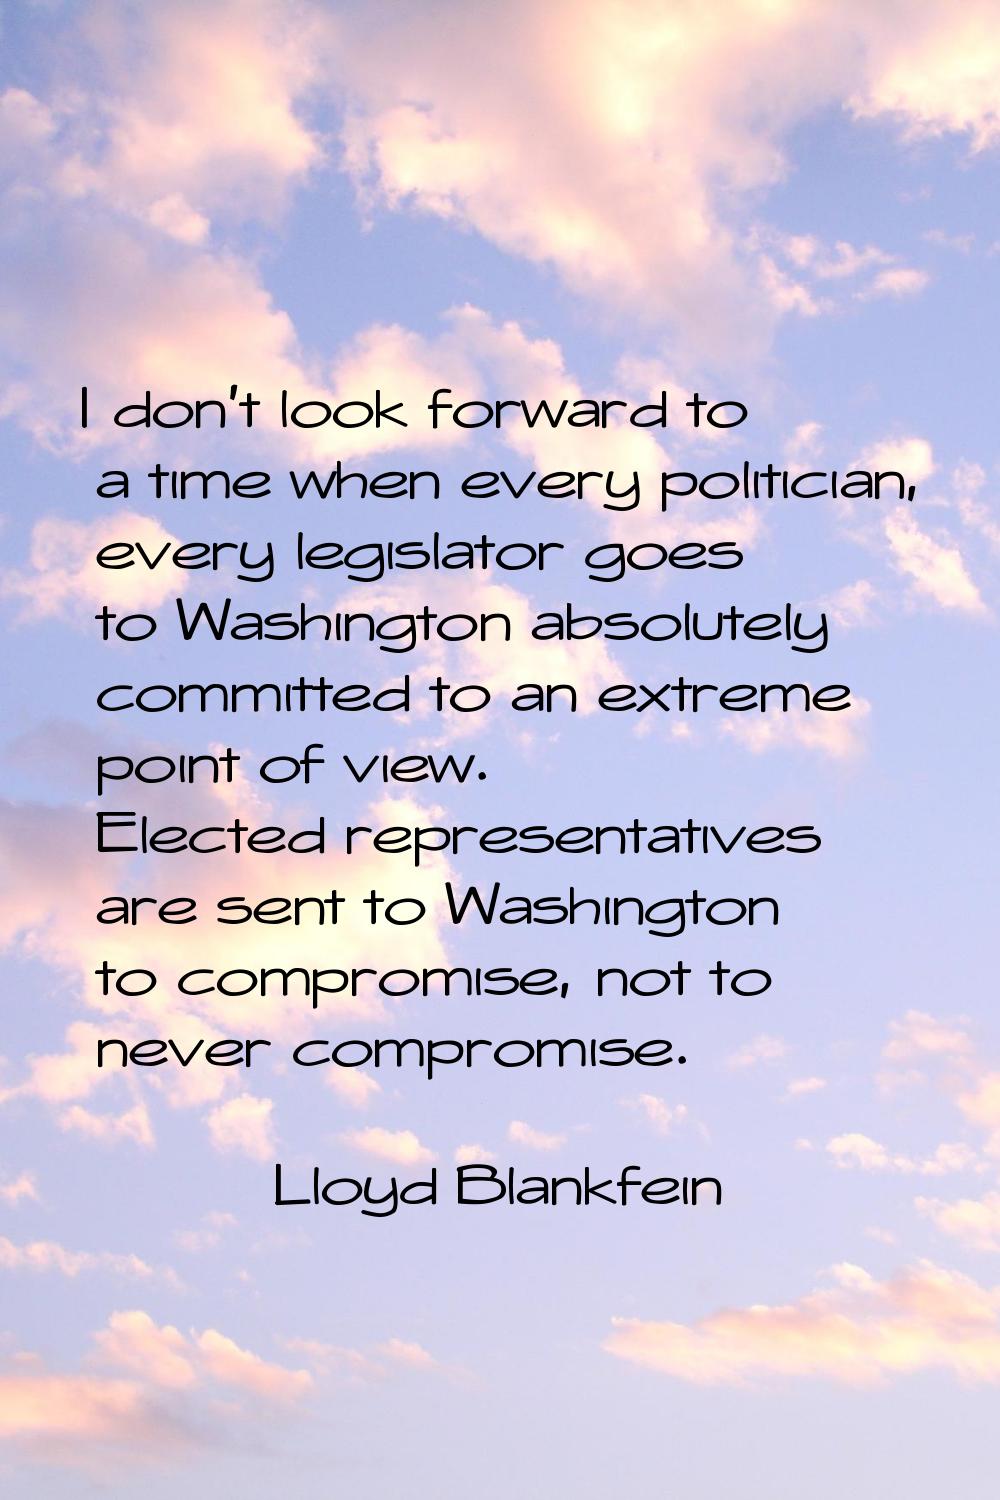 I don't look forward to a time when every politician, every legislator goes to Washington absolutel